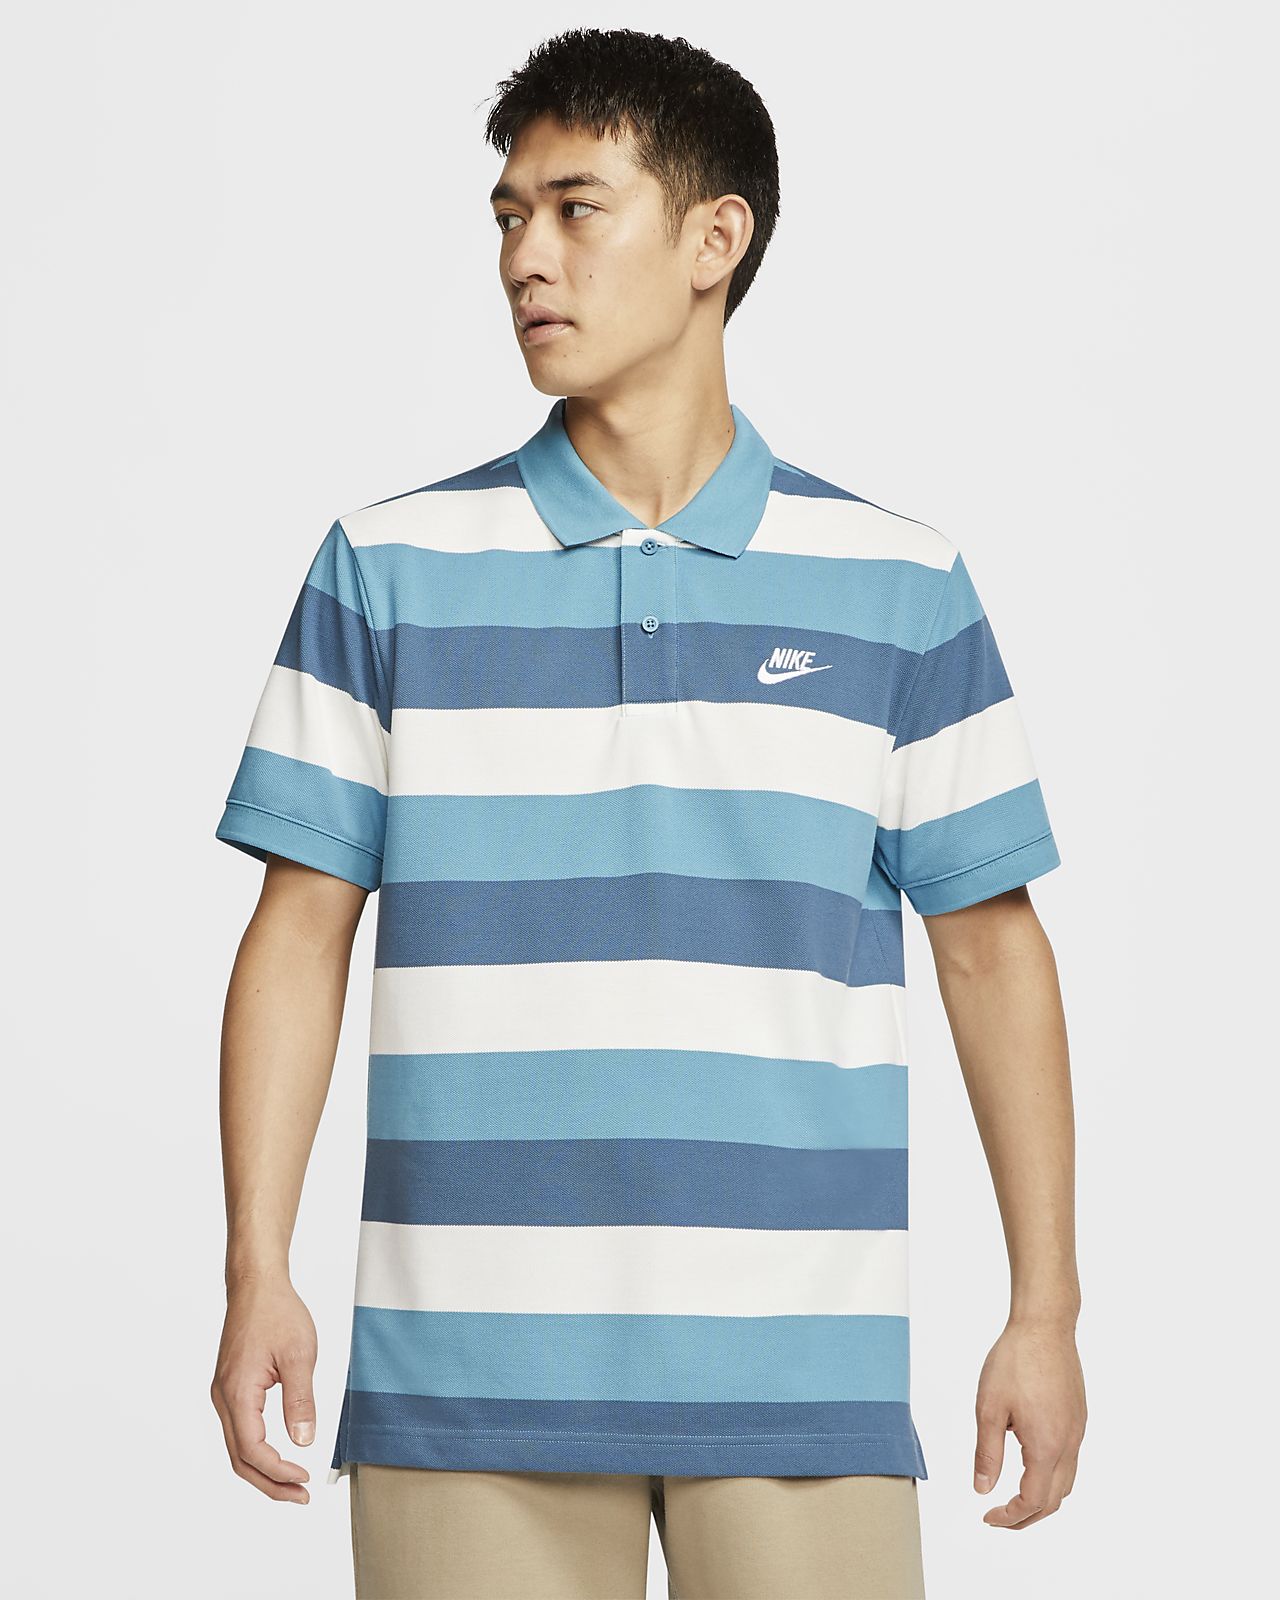 fred perry rugby shirt